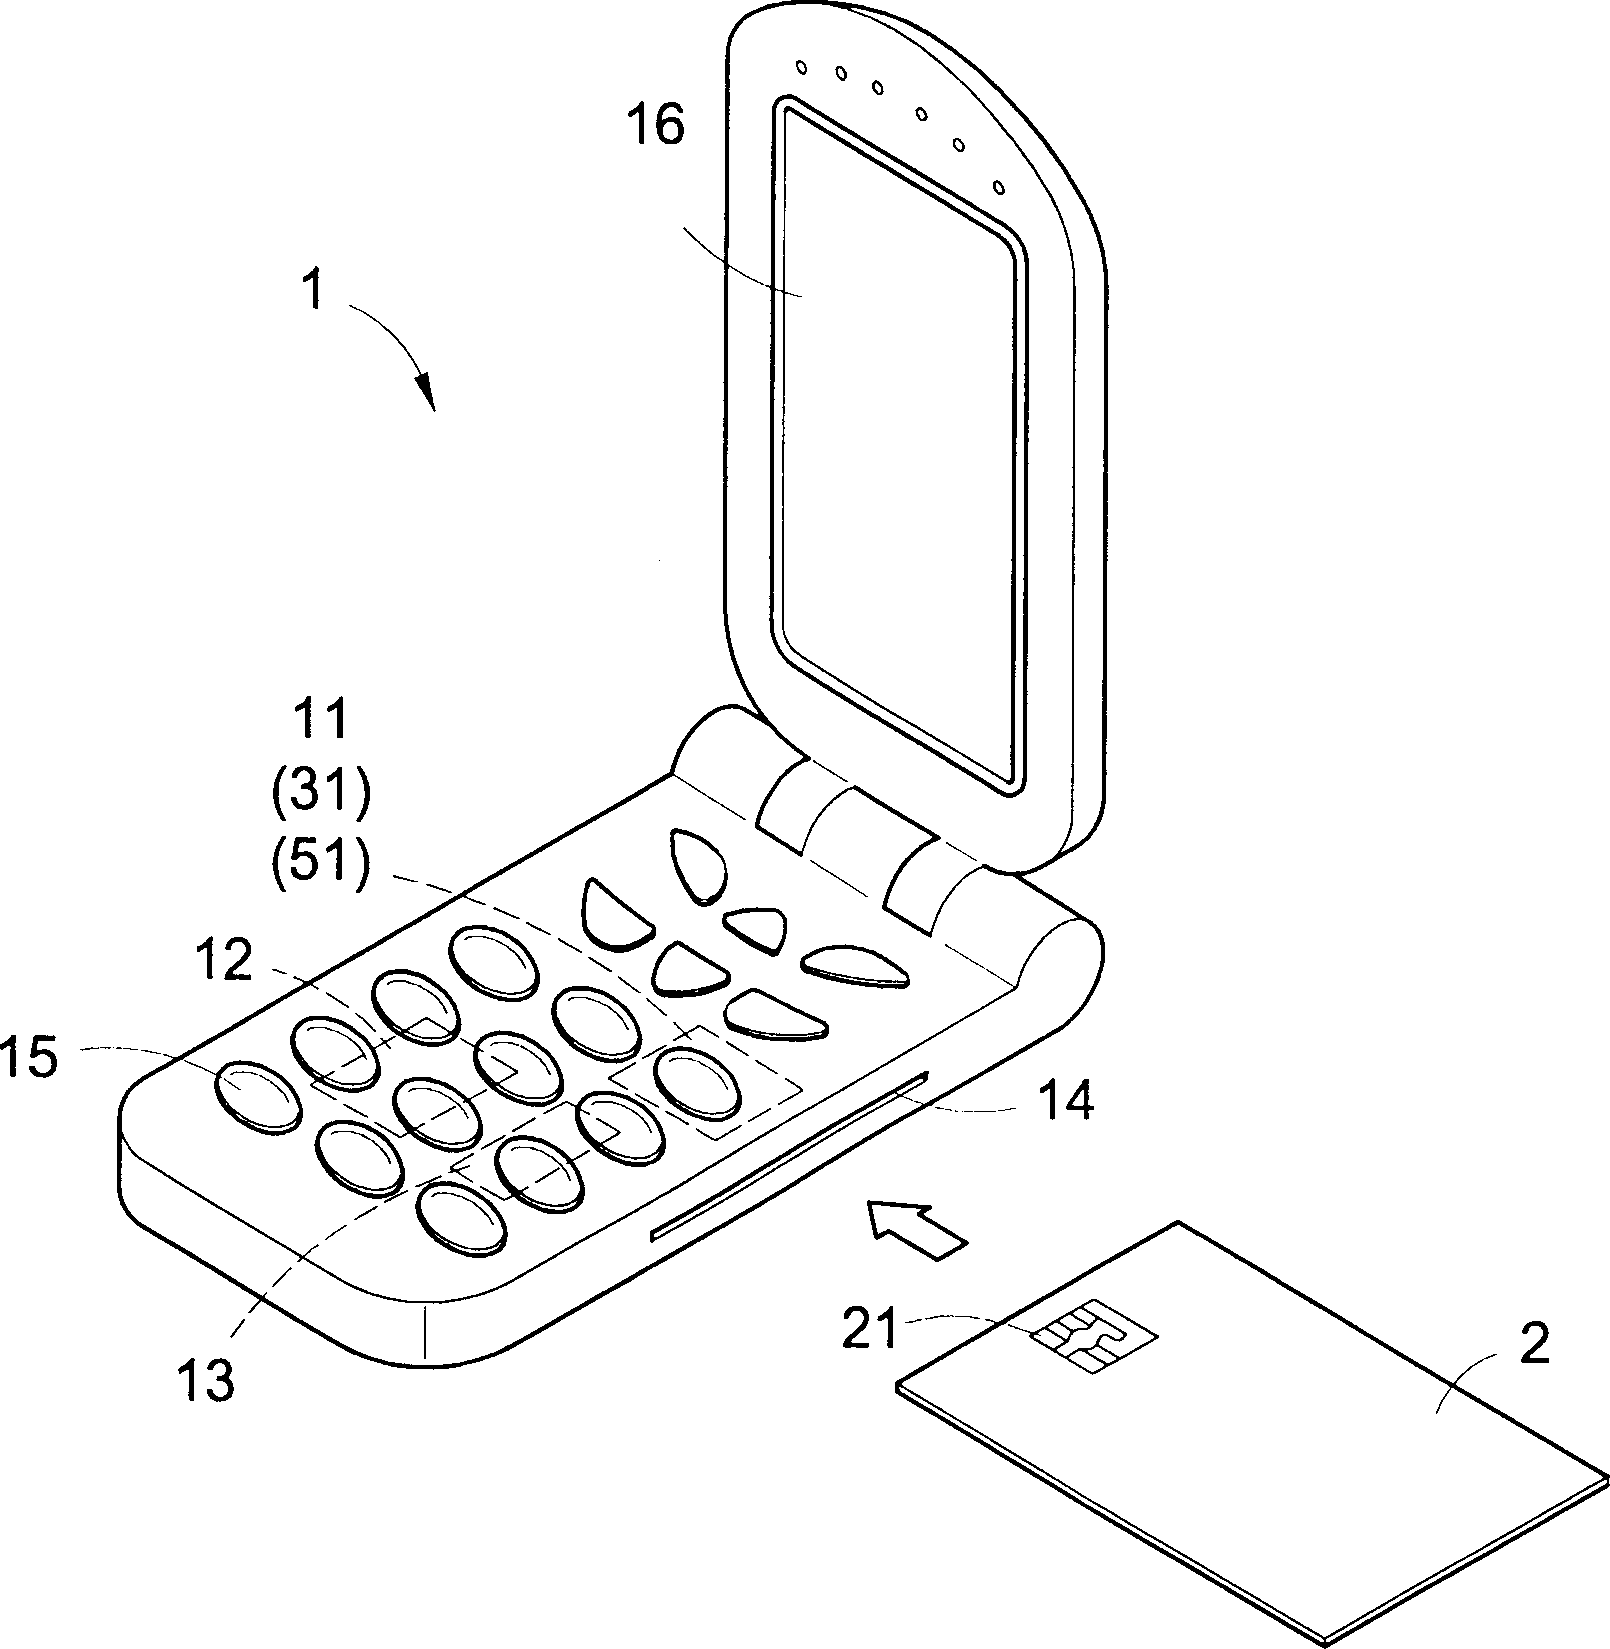 Communication equipment with the function fo reading name card data and its usage